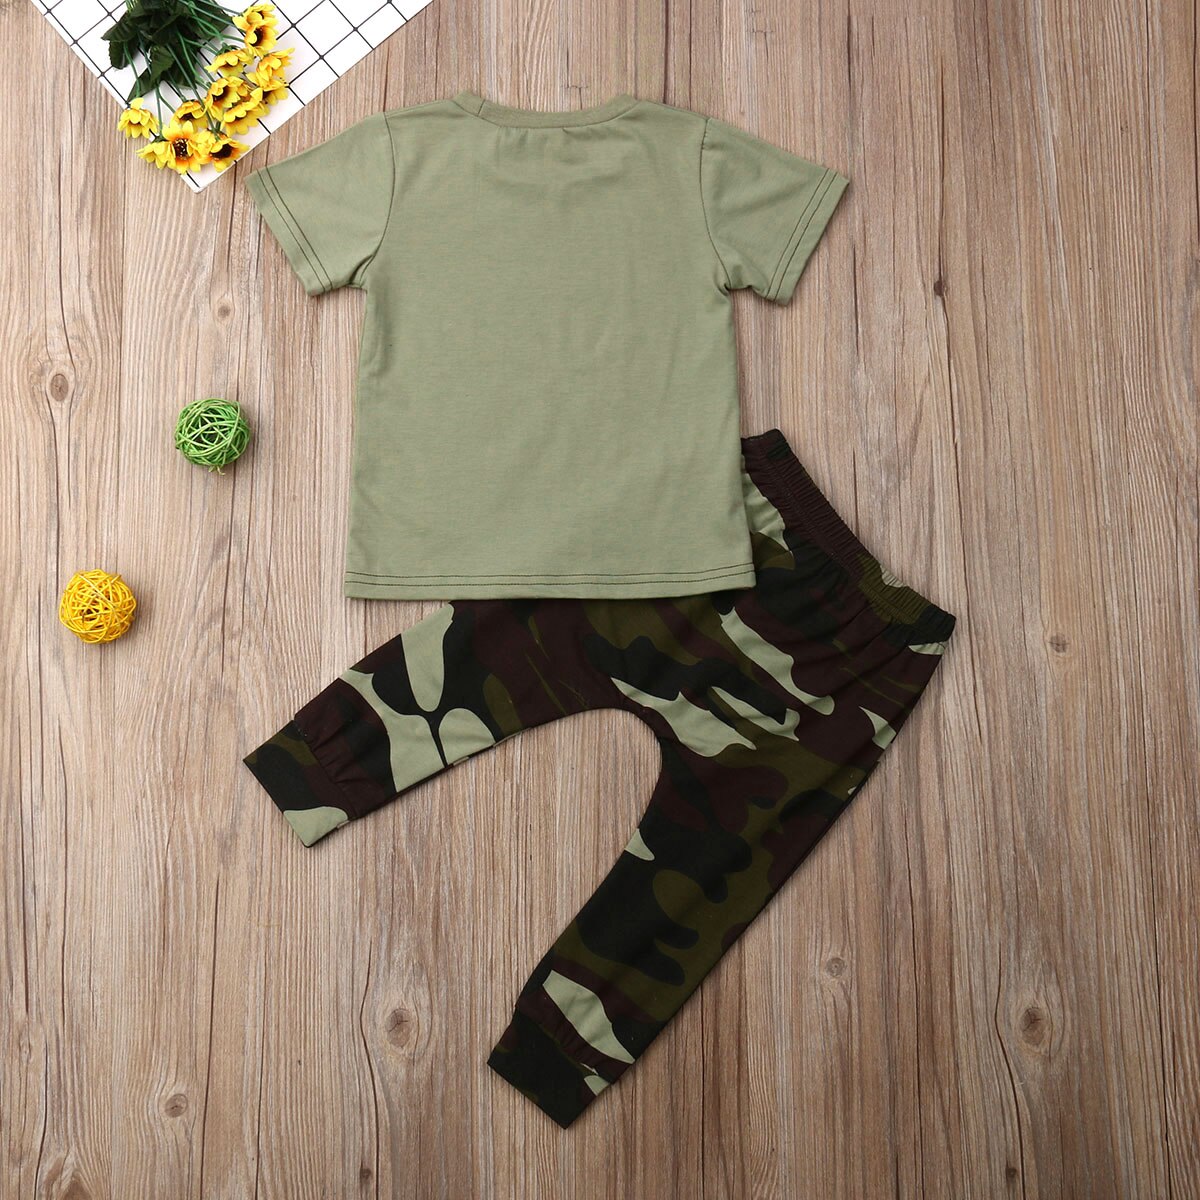 Lioraitiin 2Pcs Set 0-3years Summer Clothing Toddler Infant Boys Sets Tops T-Shirt+Camou Printed Long Pants Fashion Outfits